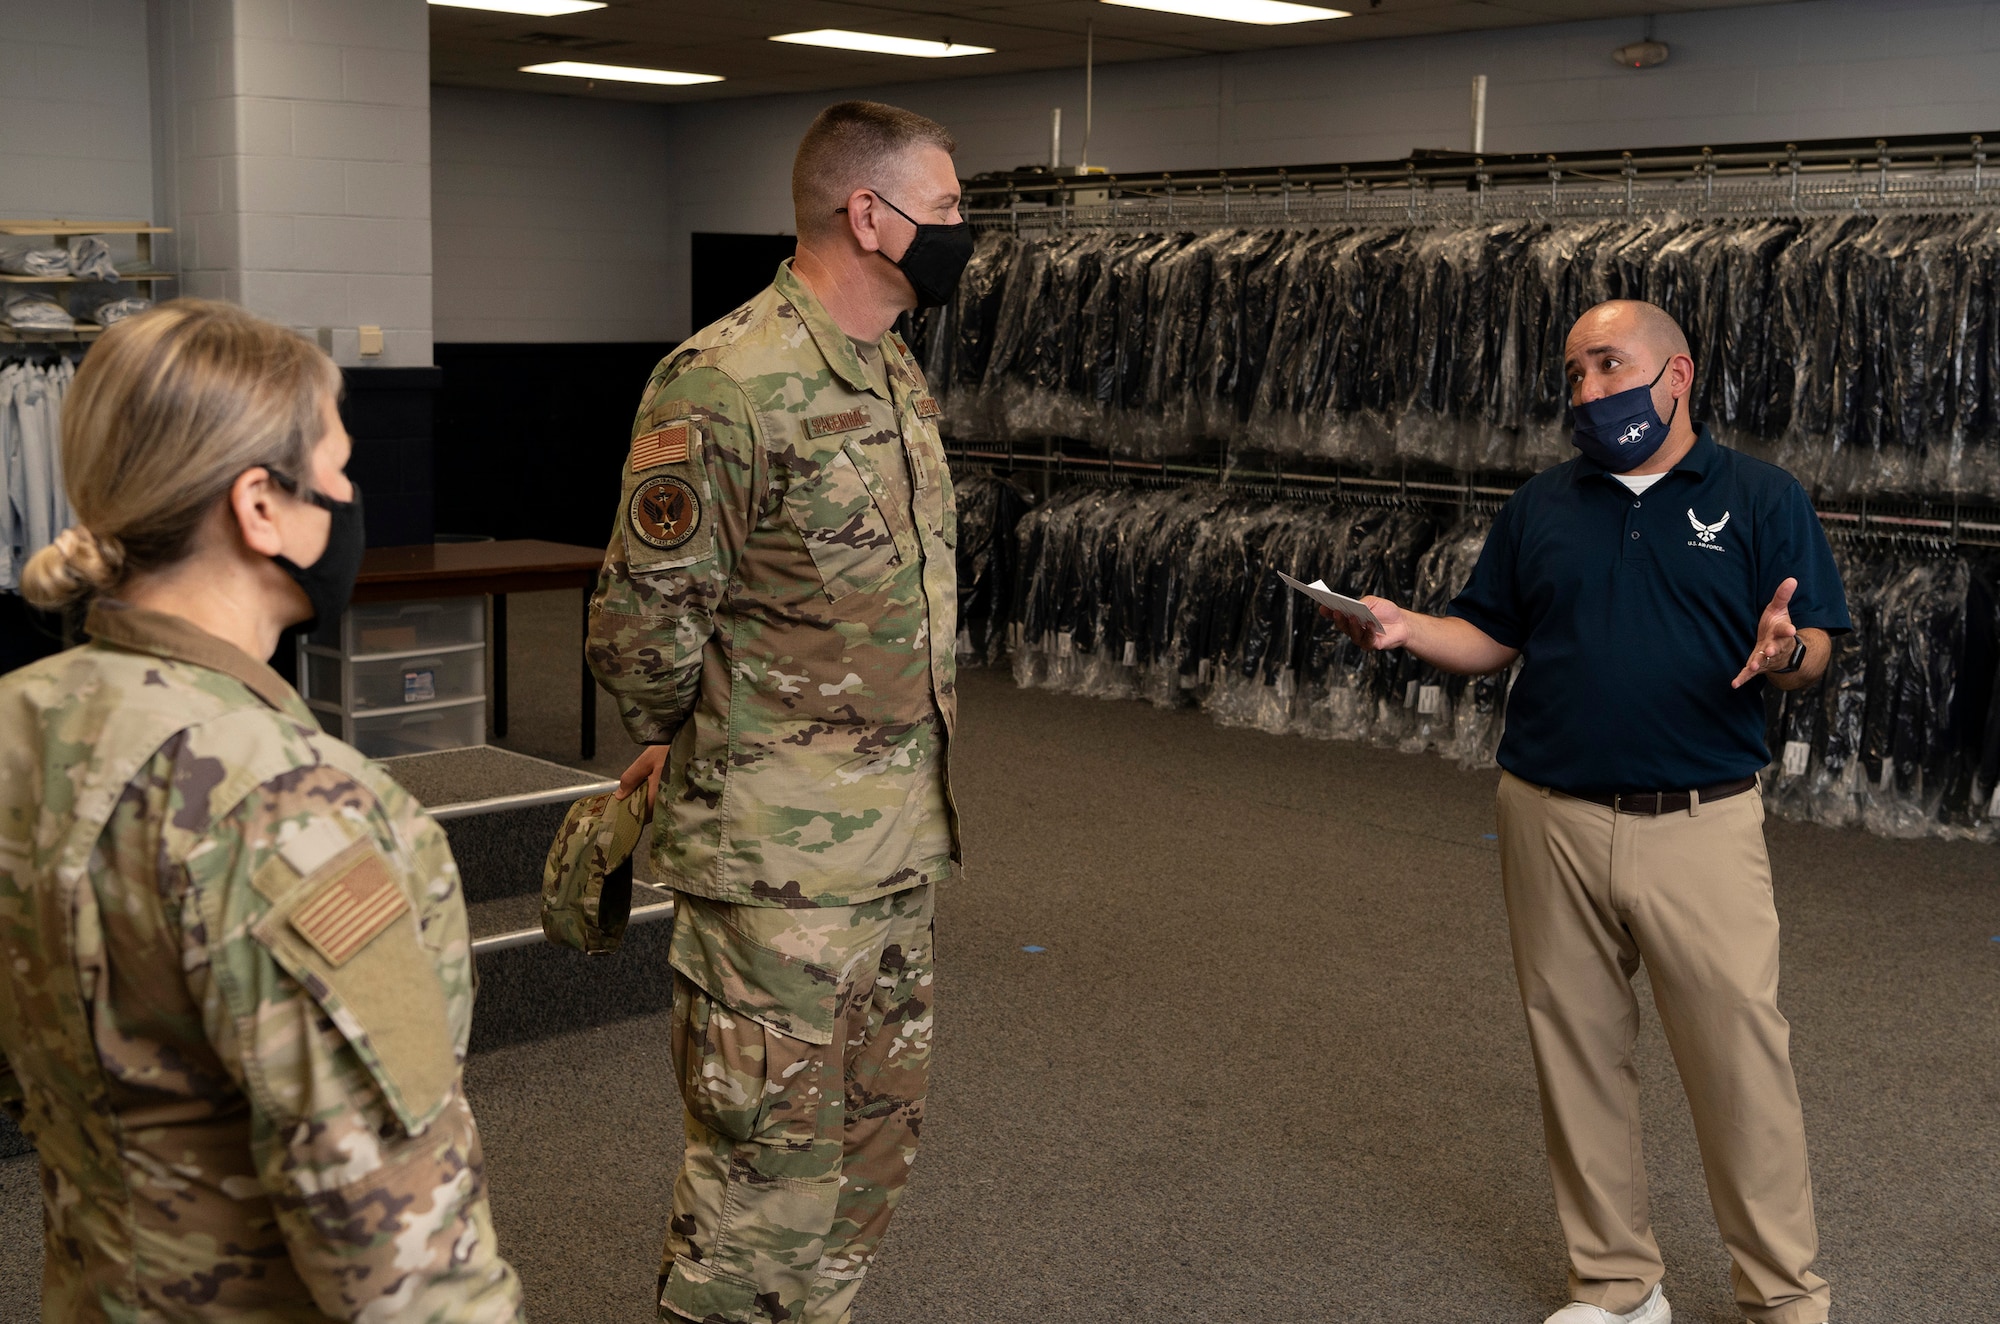 Maj. Gen. William Spangenthal, vice commander of Air Education and Training Command, elbow bumps Lt. Col. Damien Williams, 37th Training Group deputy commander, during an immersion tour June 24, 2020, at JBSA-Lackland, Texas.